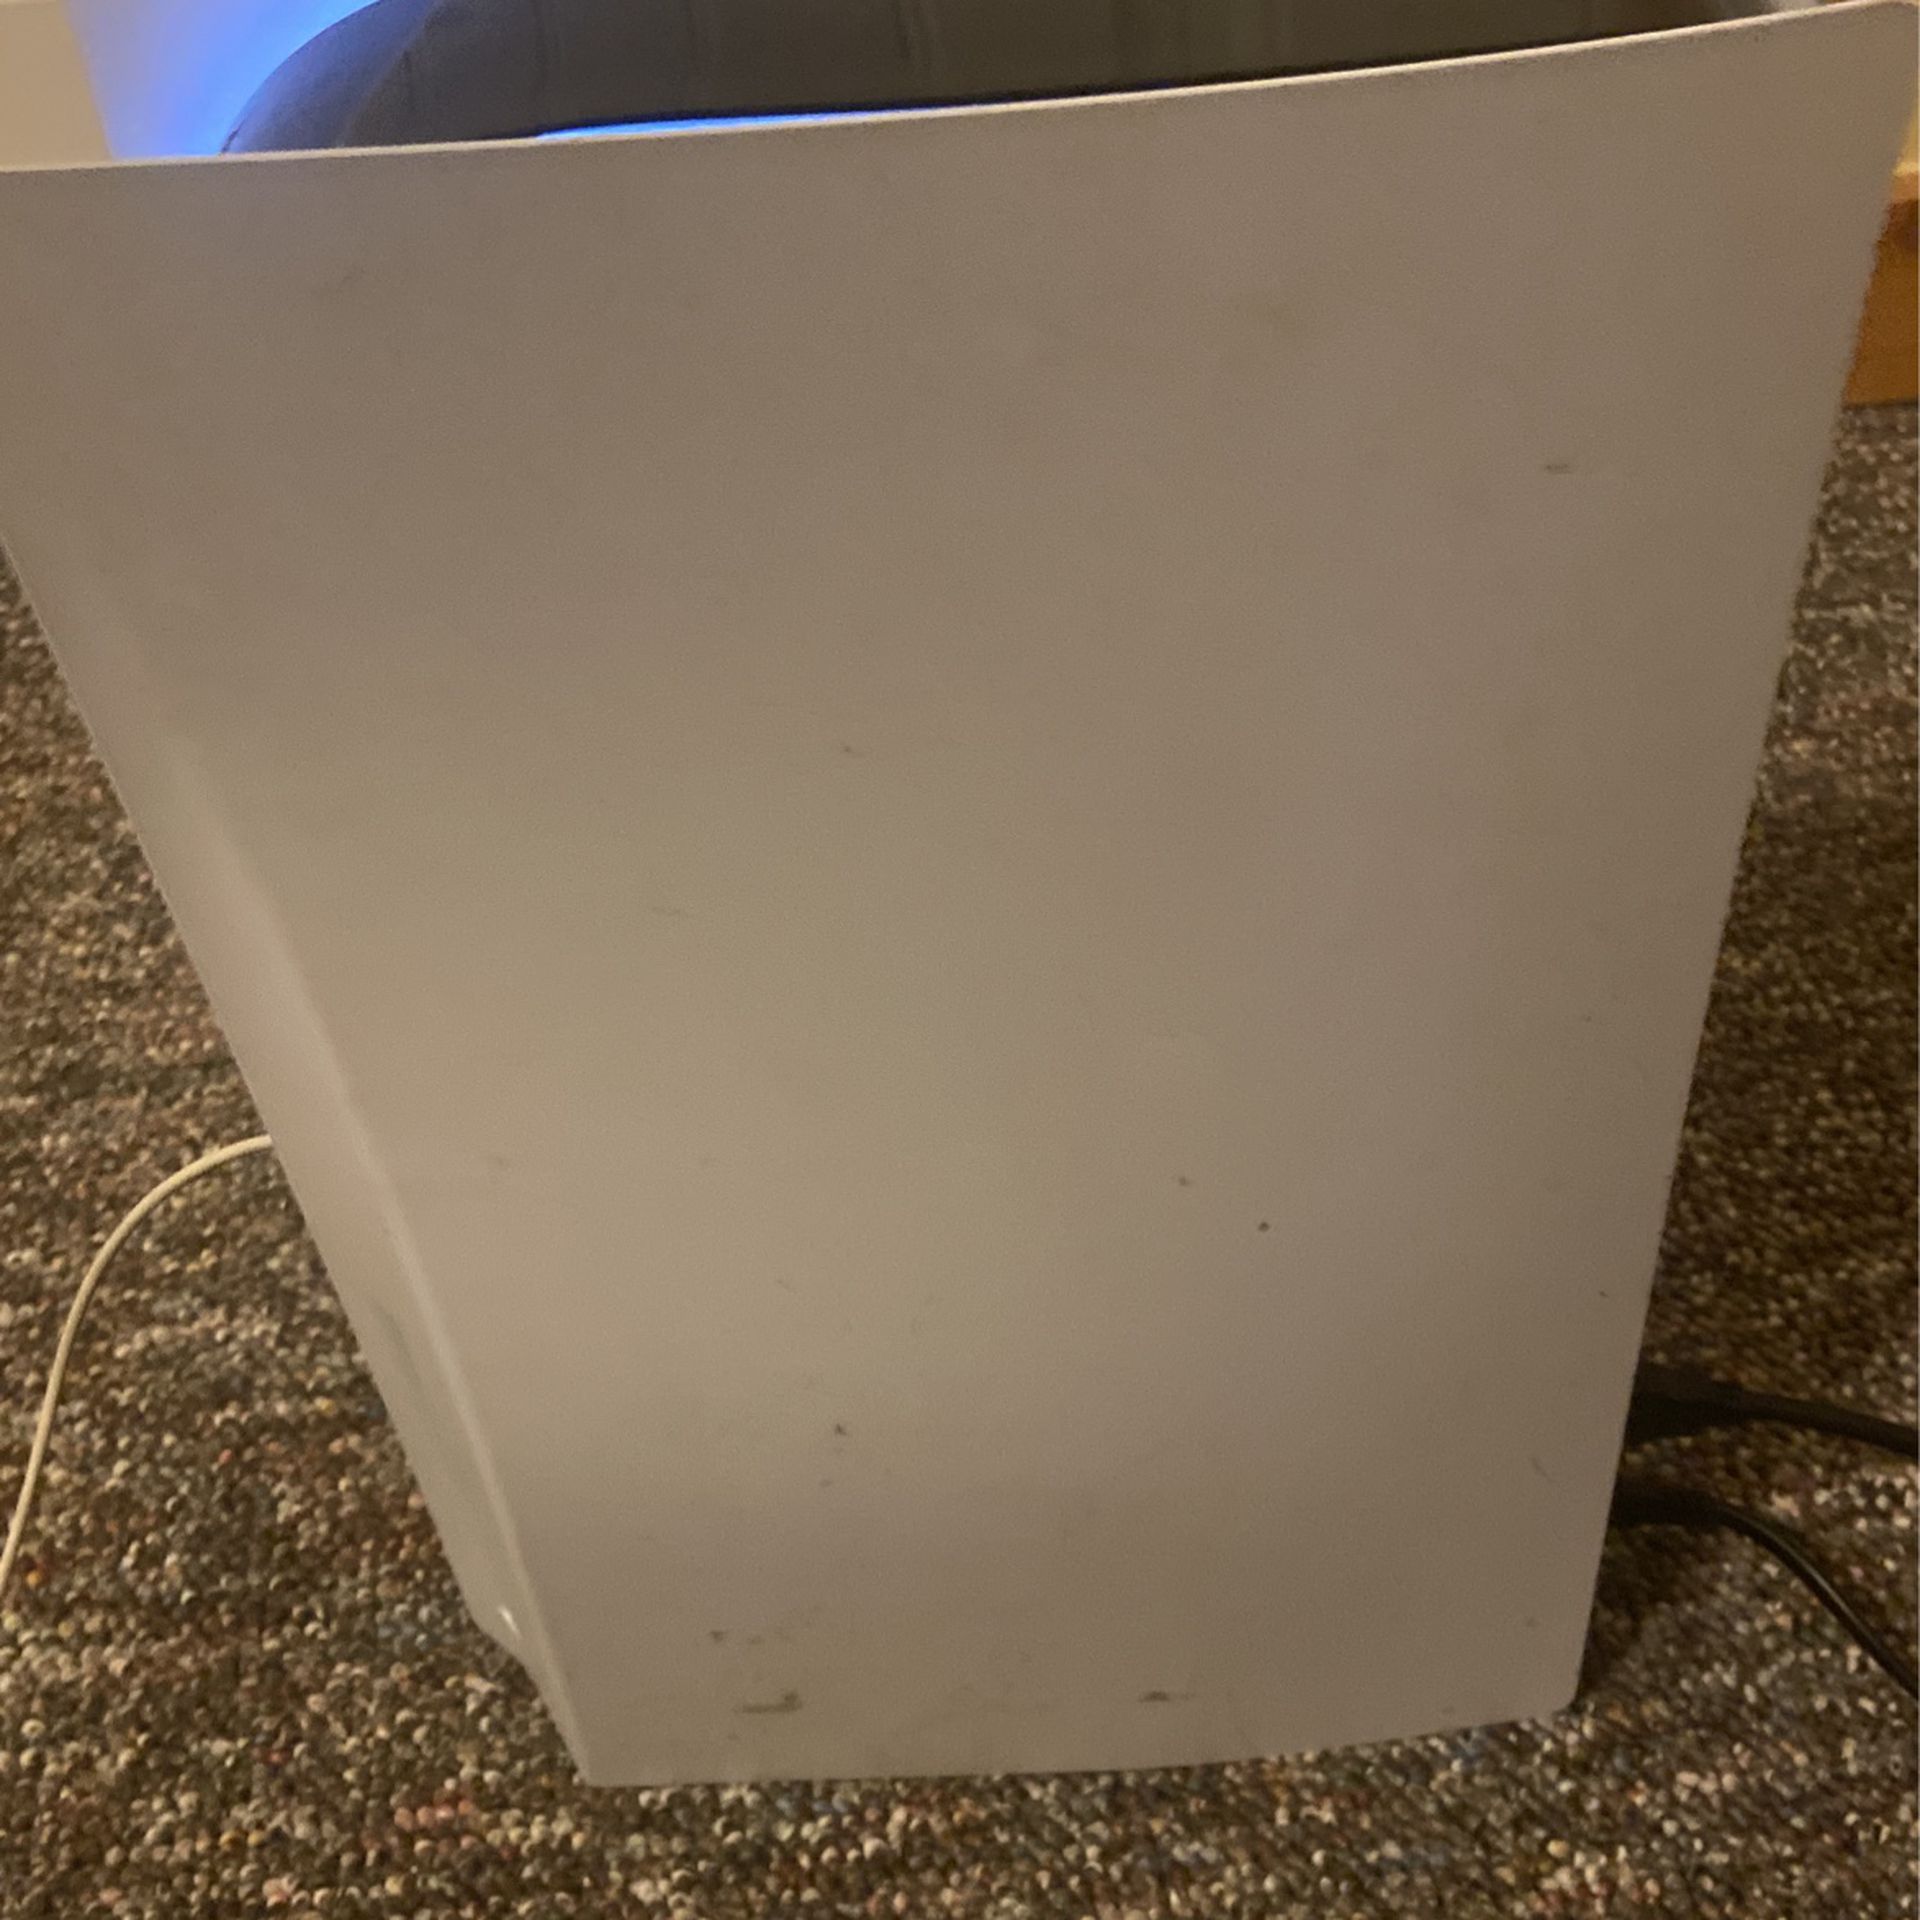 ps5 in like new condition 